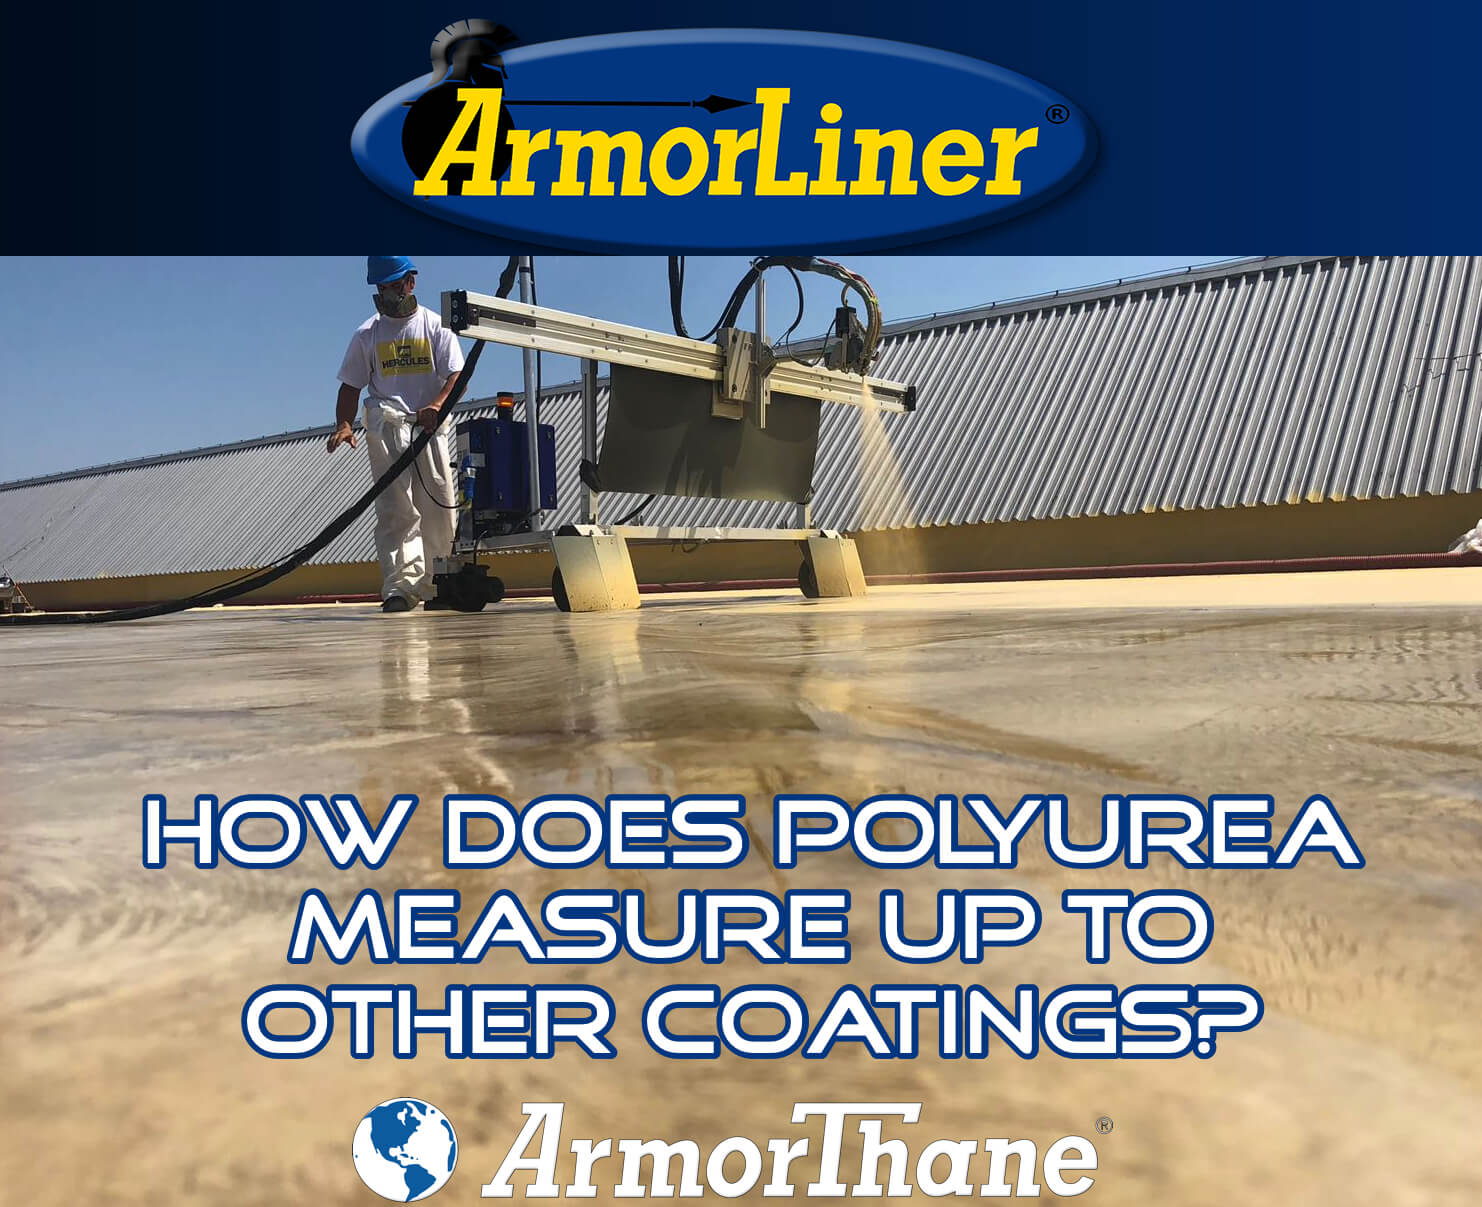 How Does Polyurea Measure Up To Other Coatings?